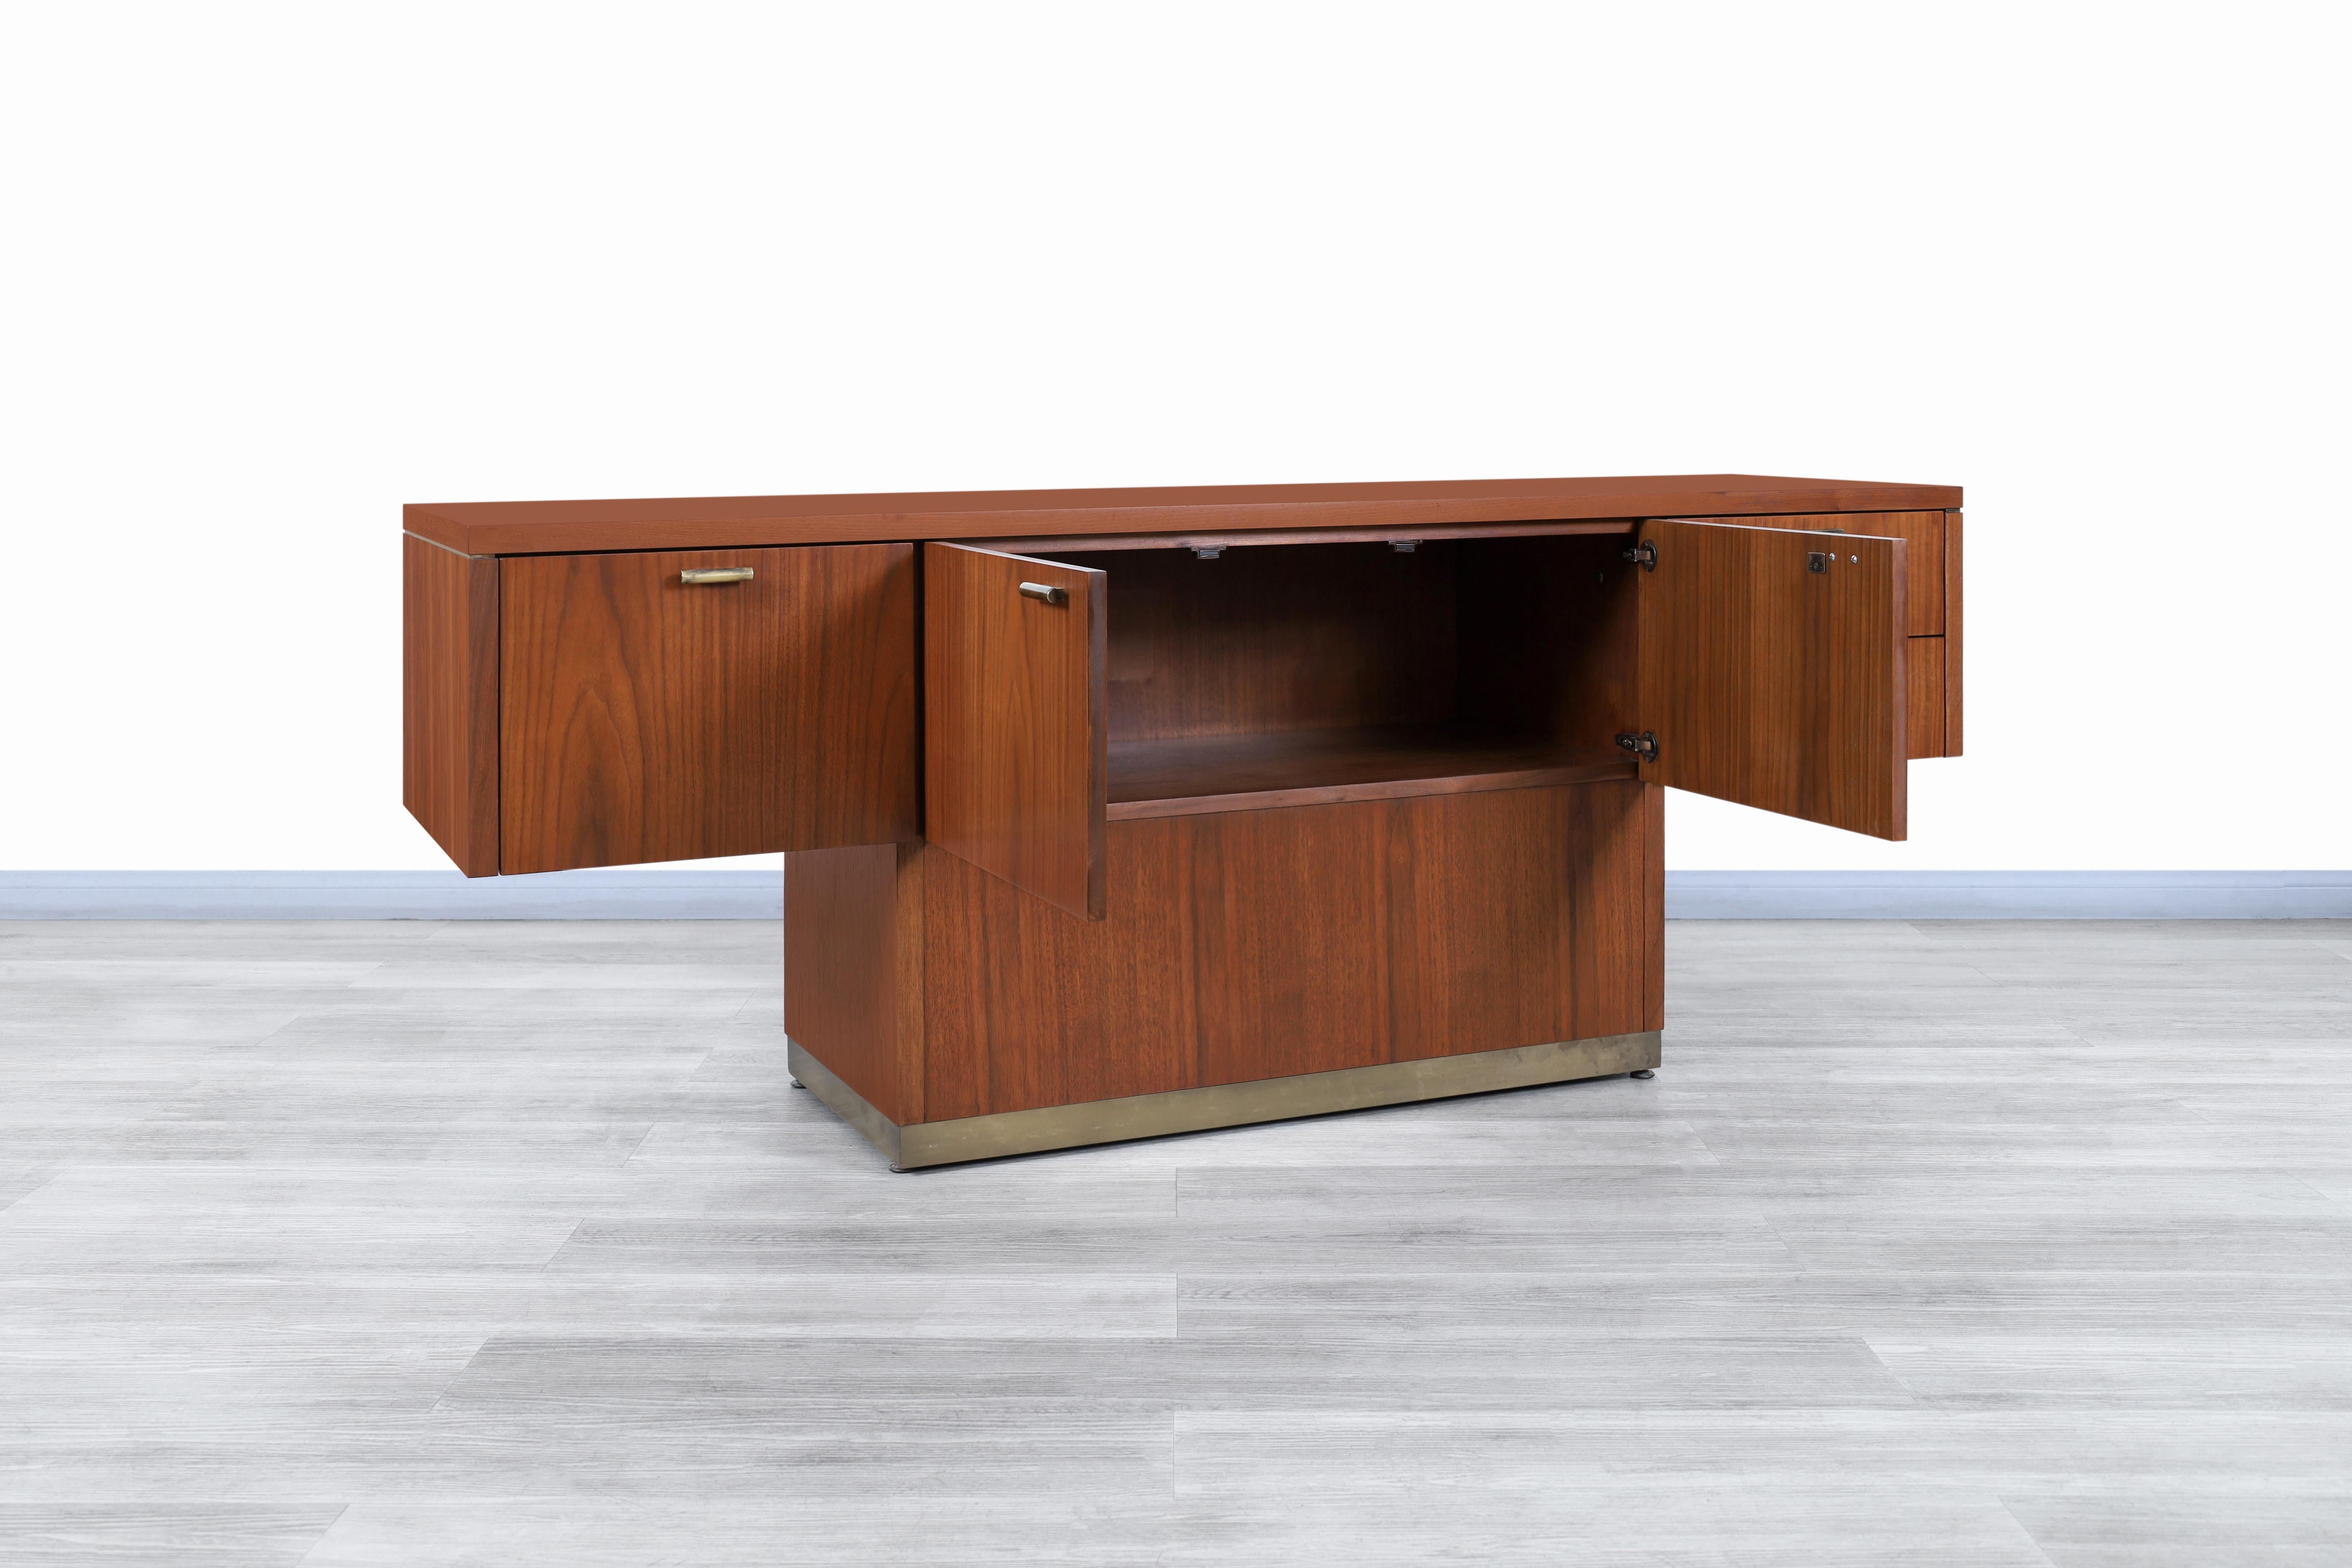 Vintage Walnut and Brass Cantilevered Credenza by Myrtle Desk Co In Excellent Condition For Sale In North Hollywood, CA